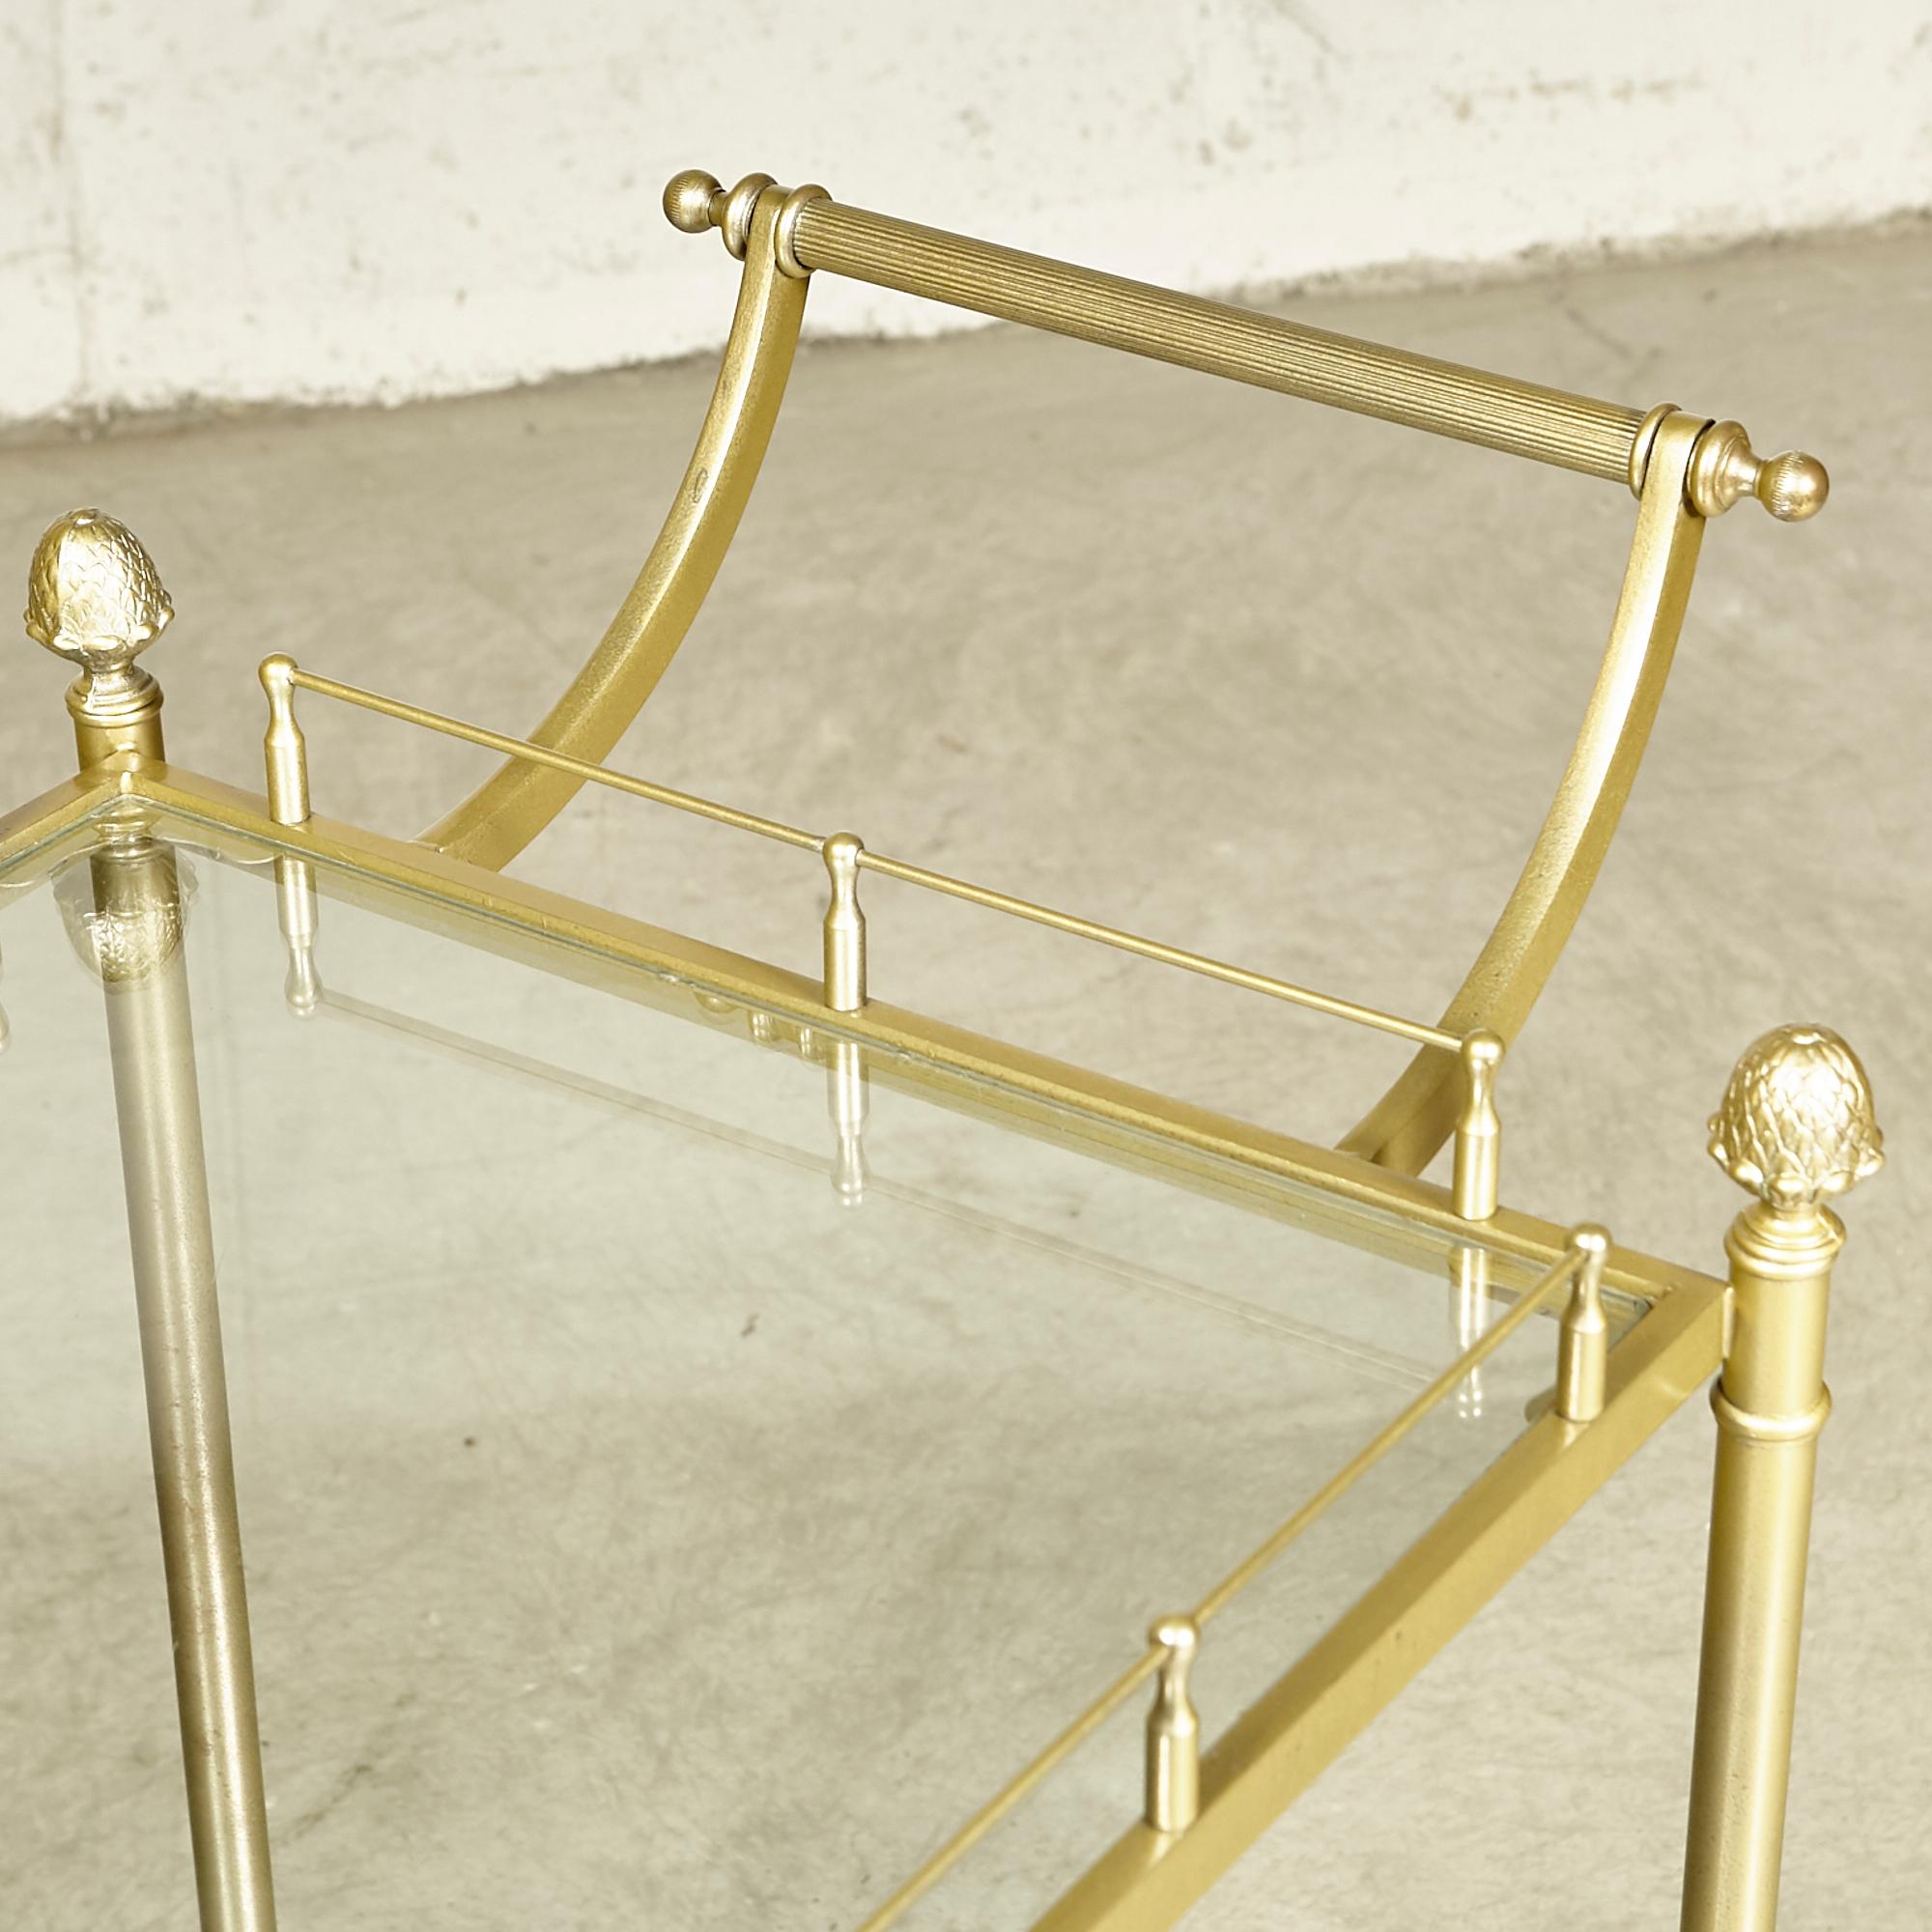 Brass and Glass Rolling Service Cart, 1960s (Messing) im Angebot